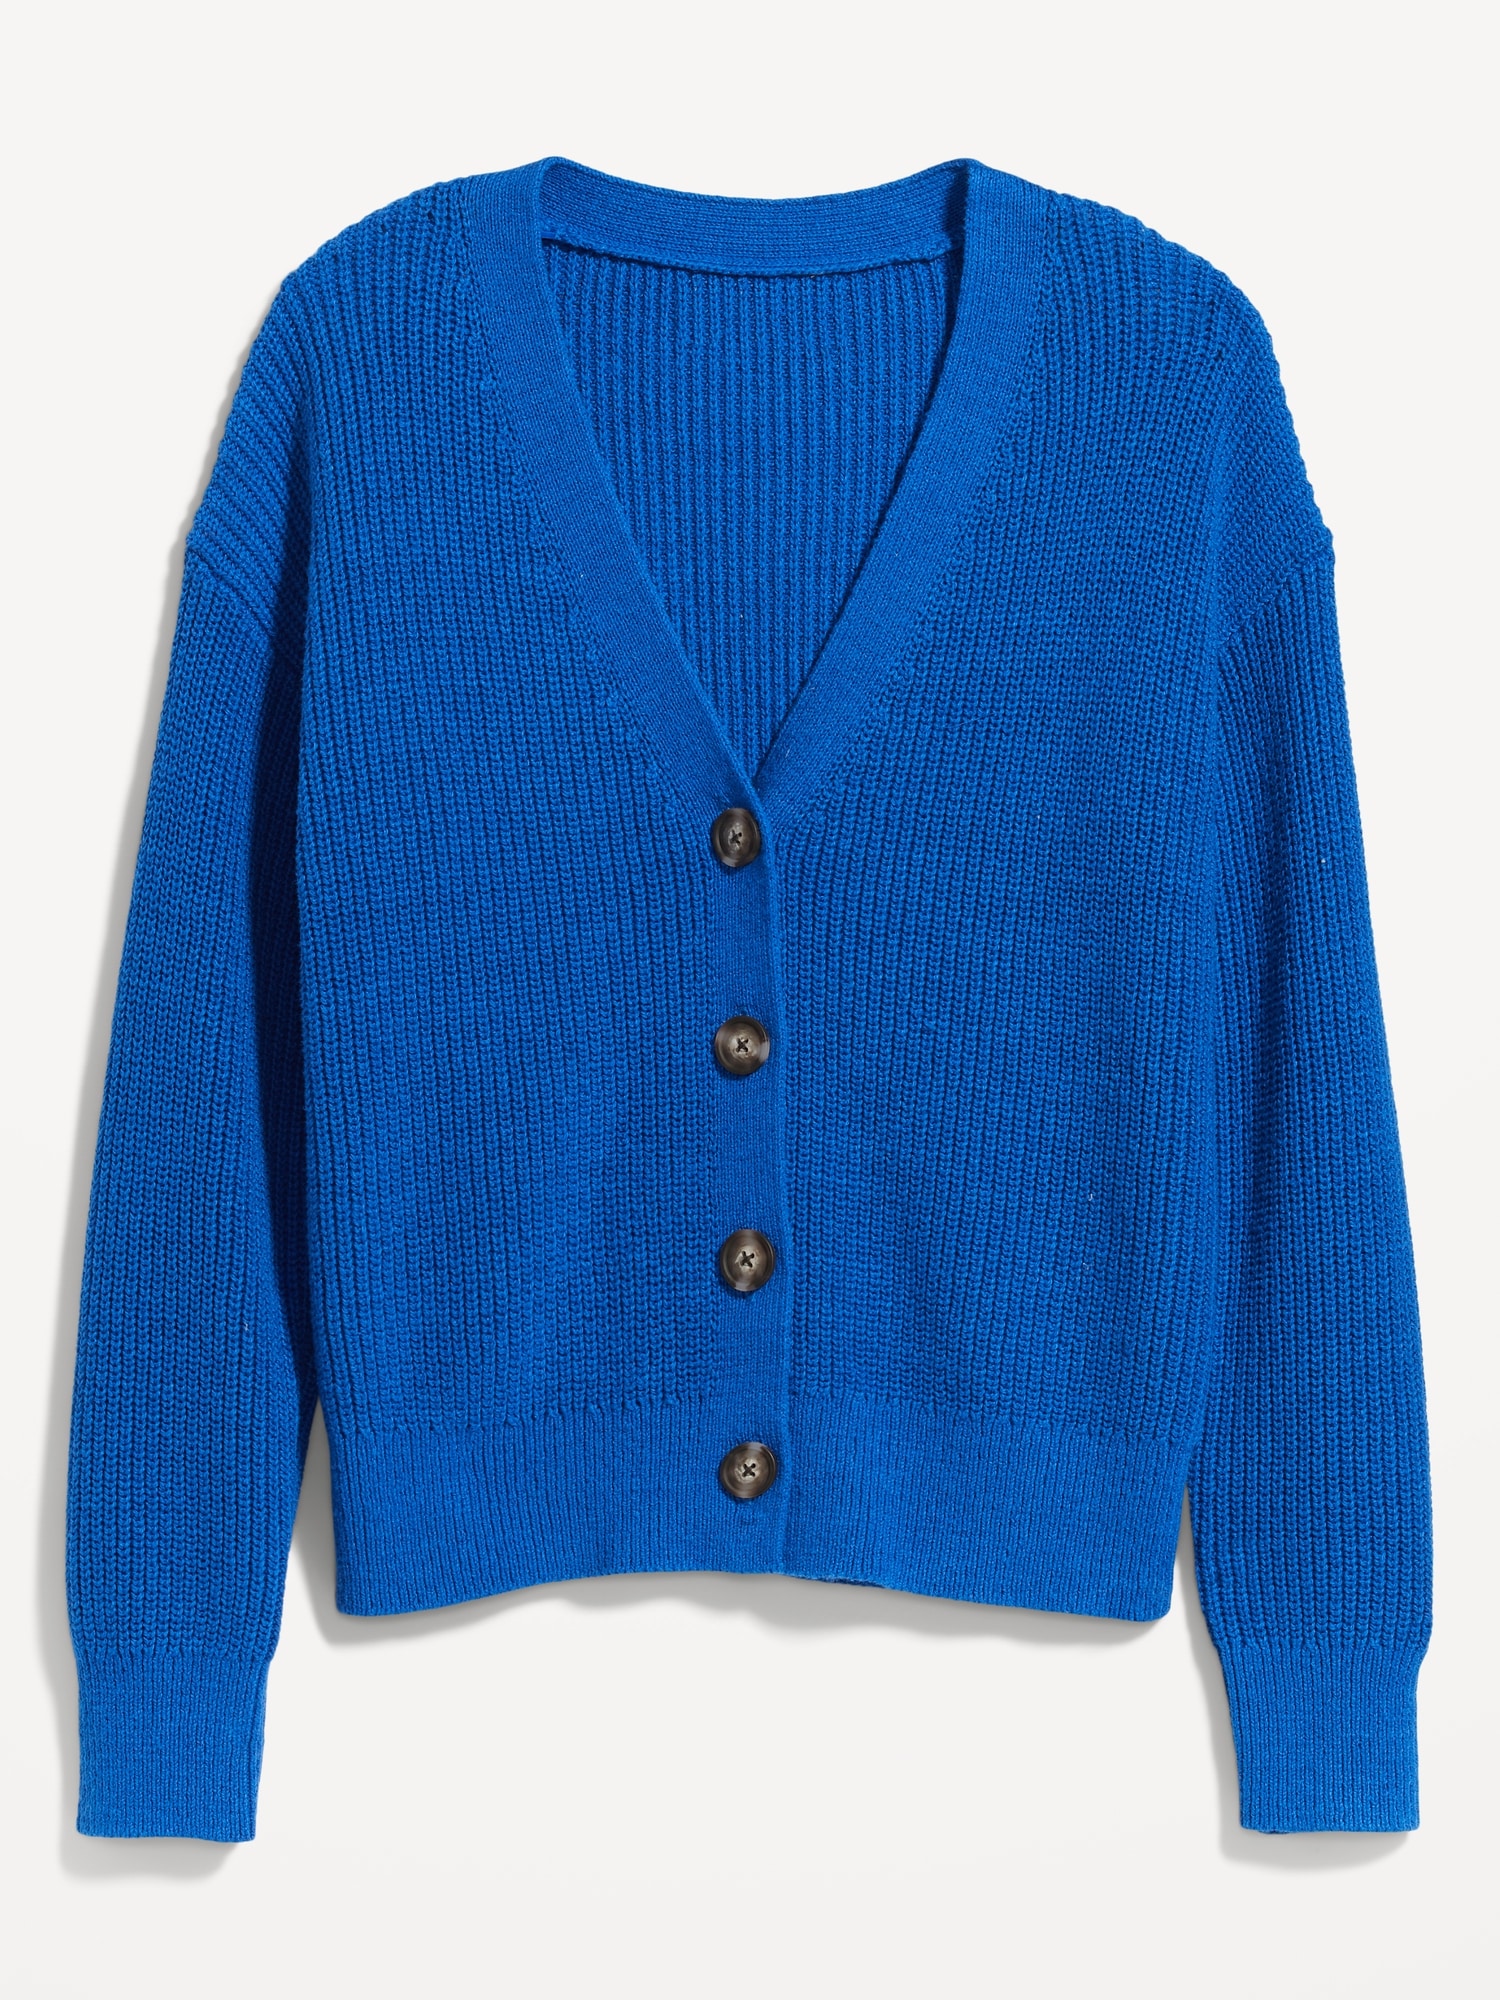 Lightweight Cotton and Linen-Blend Shaker-Stitch Cardigan Sweater for Women  | Old Navy